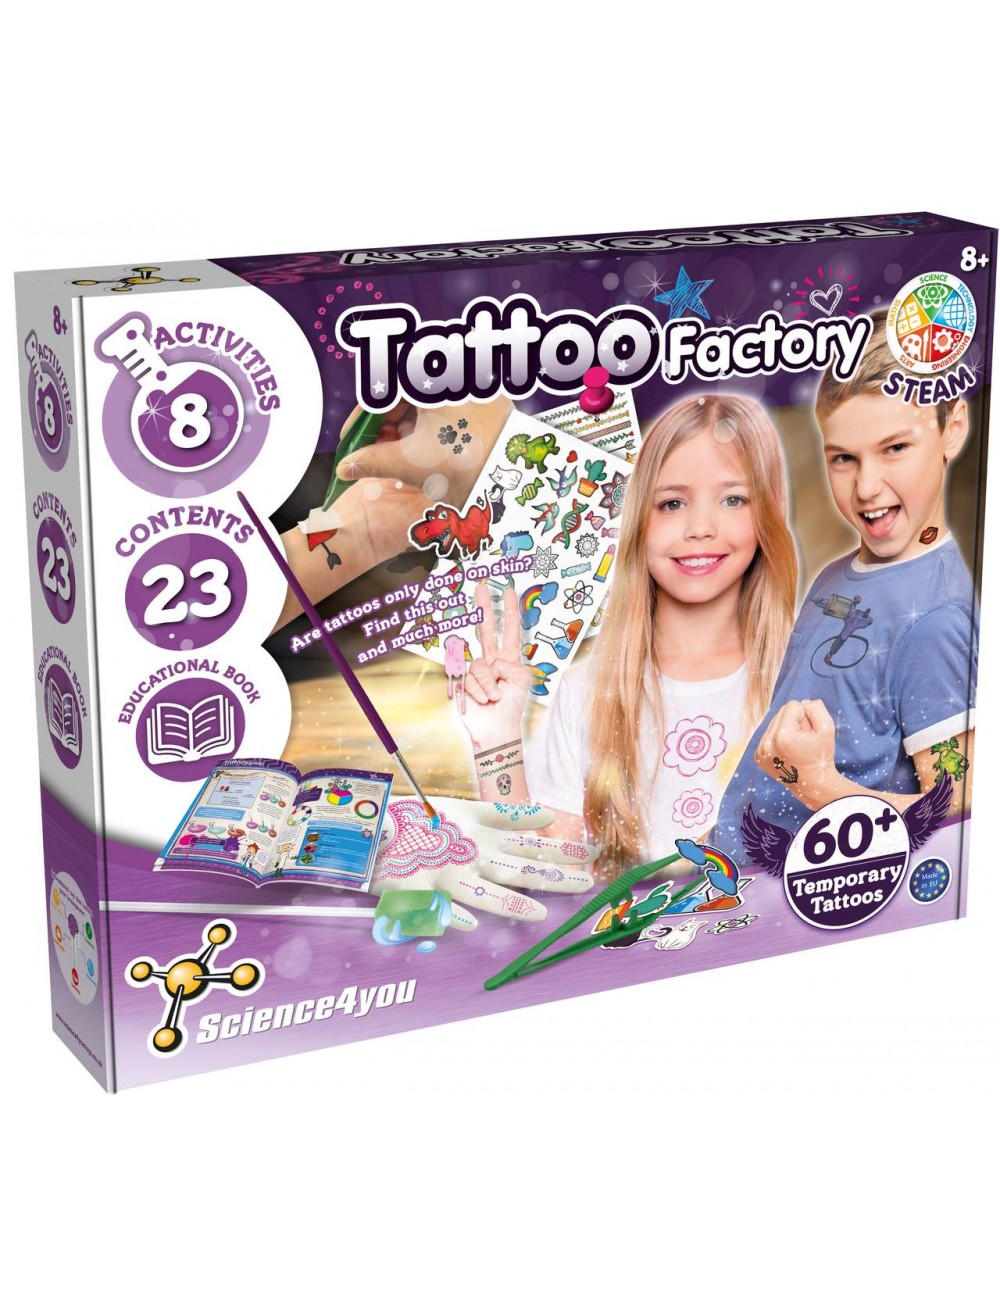 Tattoo Factory Game for Kids